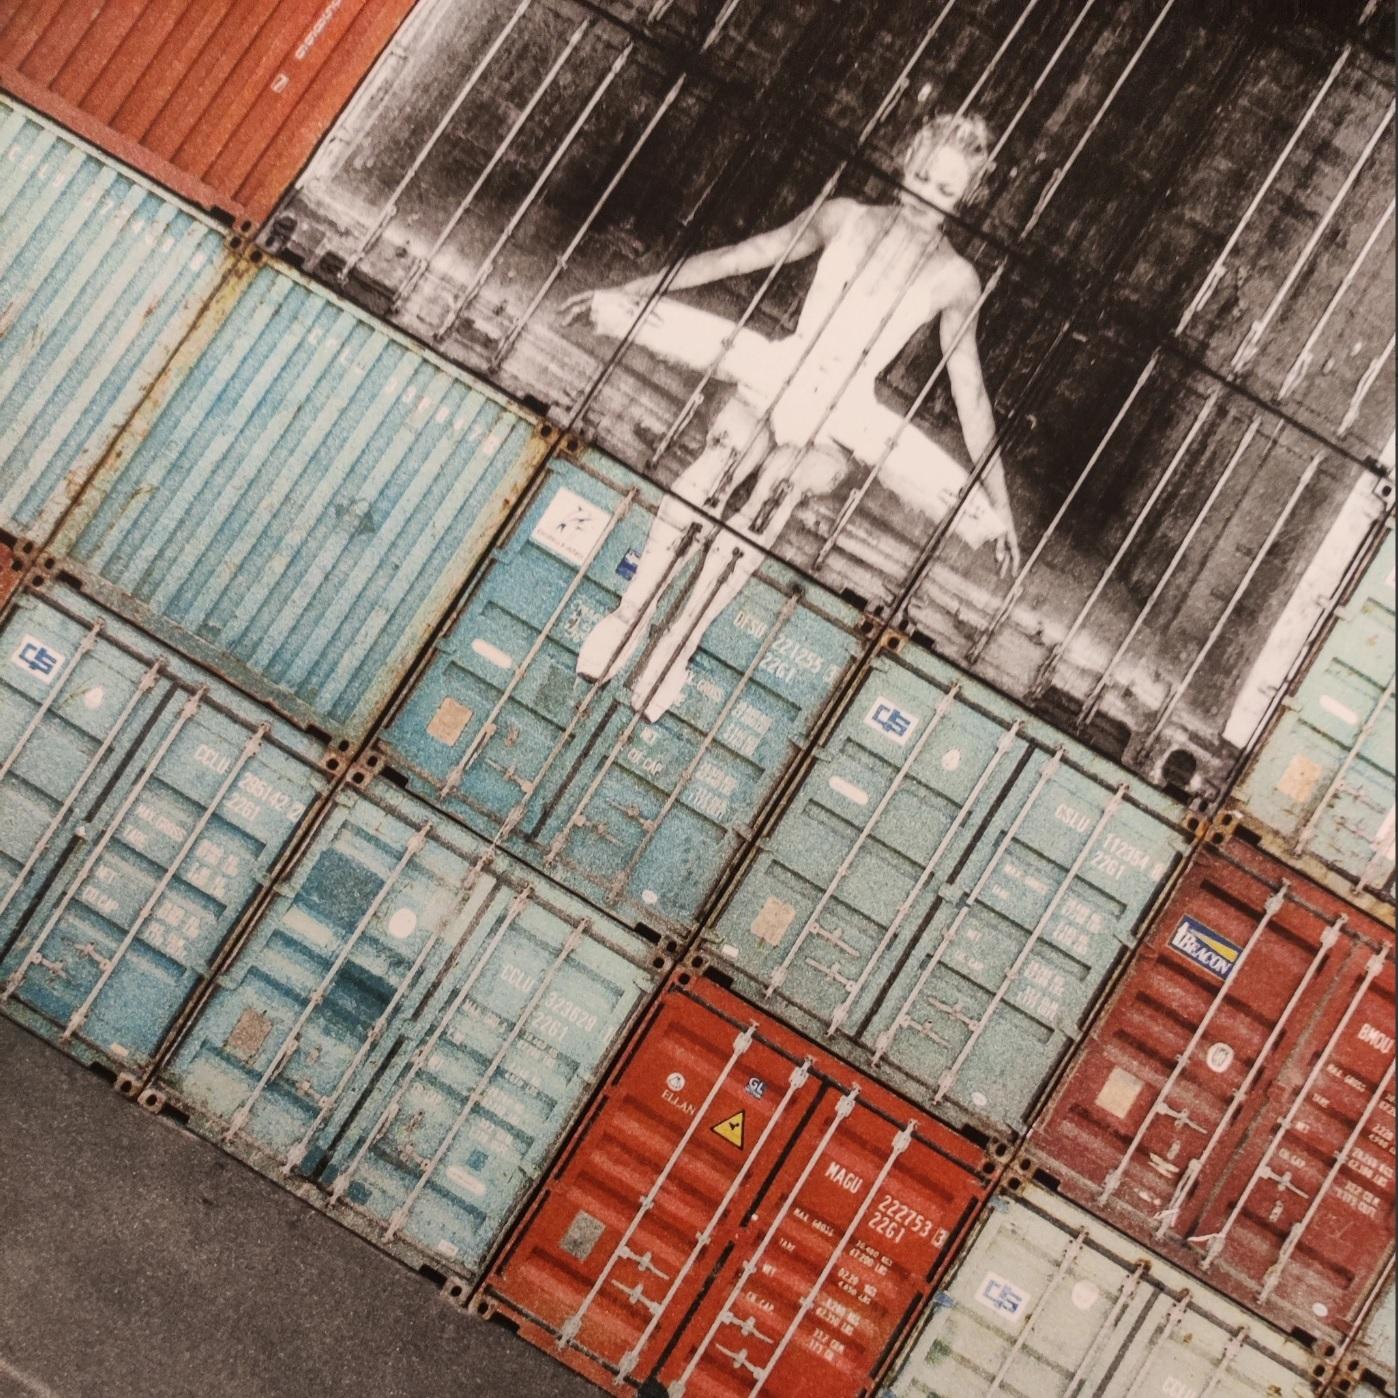 JR, In the Container Wall, Le Havre, France 
Contemporary, 21st Century, Lithograph
20 colours lithograph
Edition of 180
50 x 70 cm (19.6 x 27.5 in)
Signed and numbered
In mint condition, as acquired from the publisher
Accompanied by Certificate of